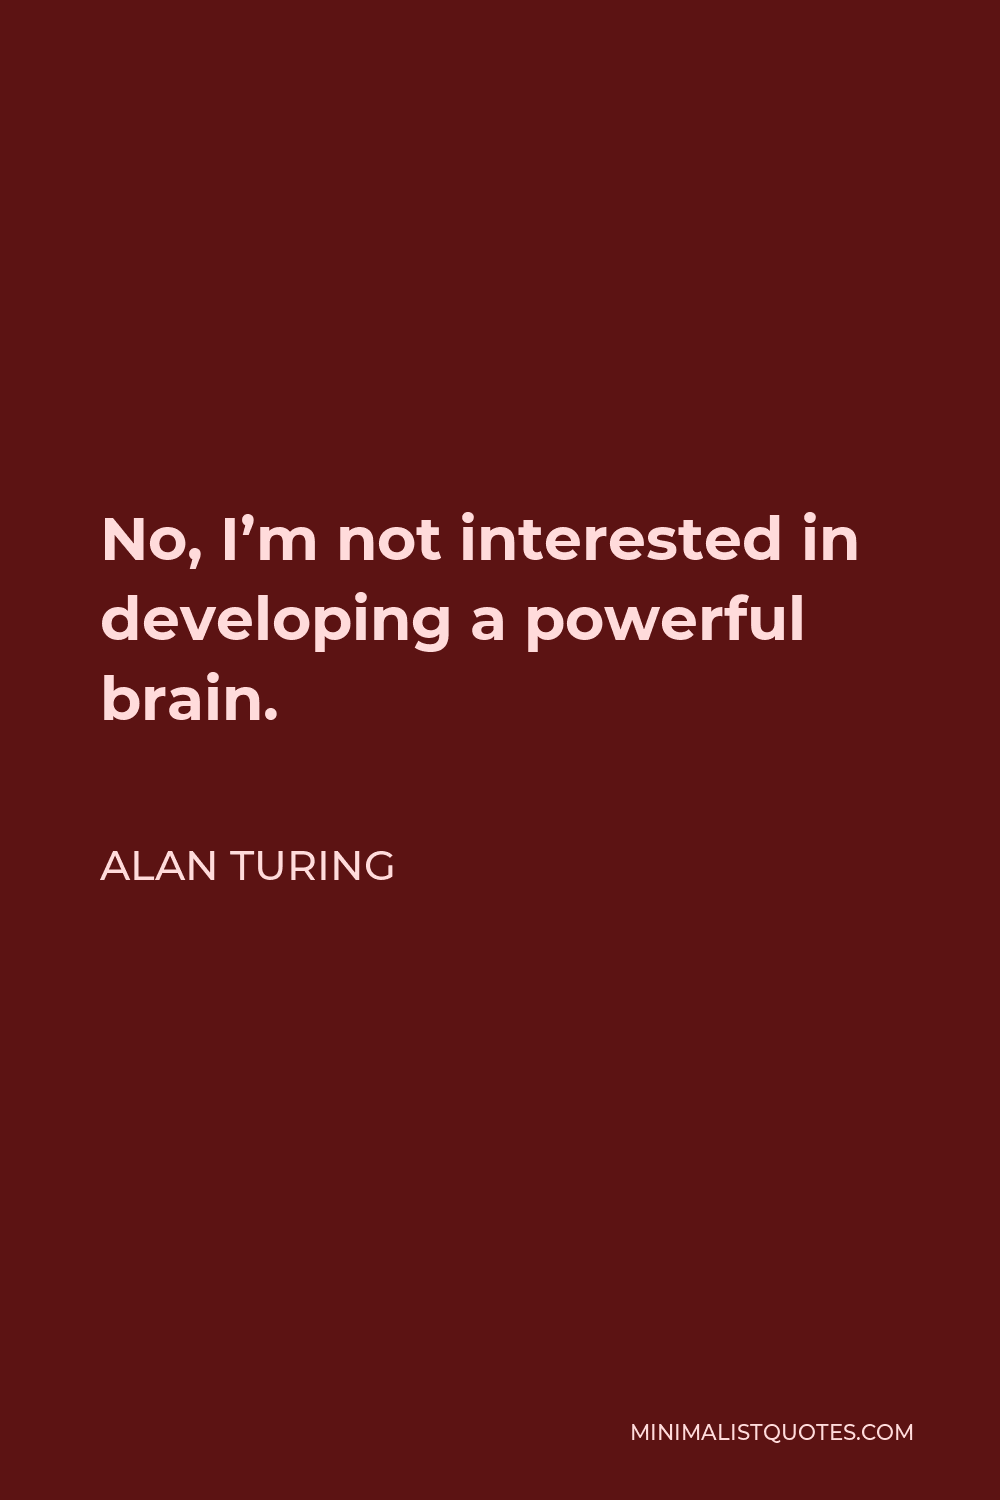 Alan Turing Quote - No, I’m not interested in developing a powerful brain.